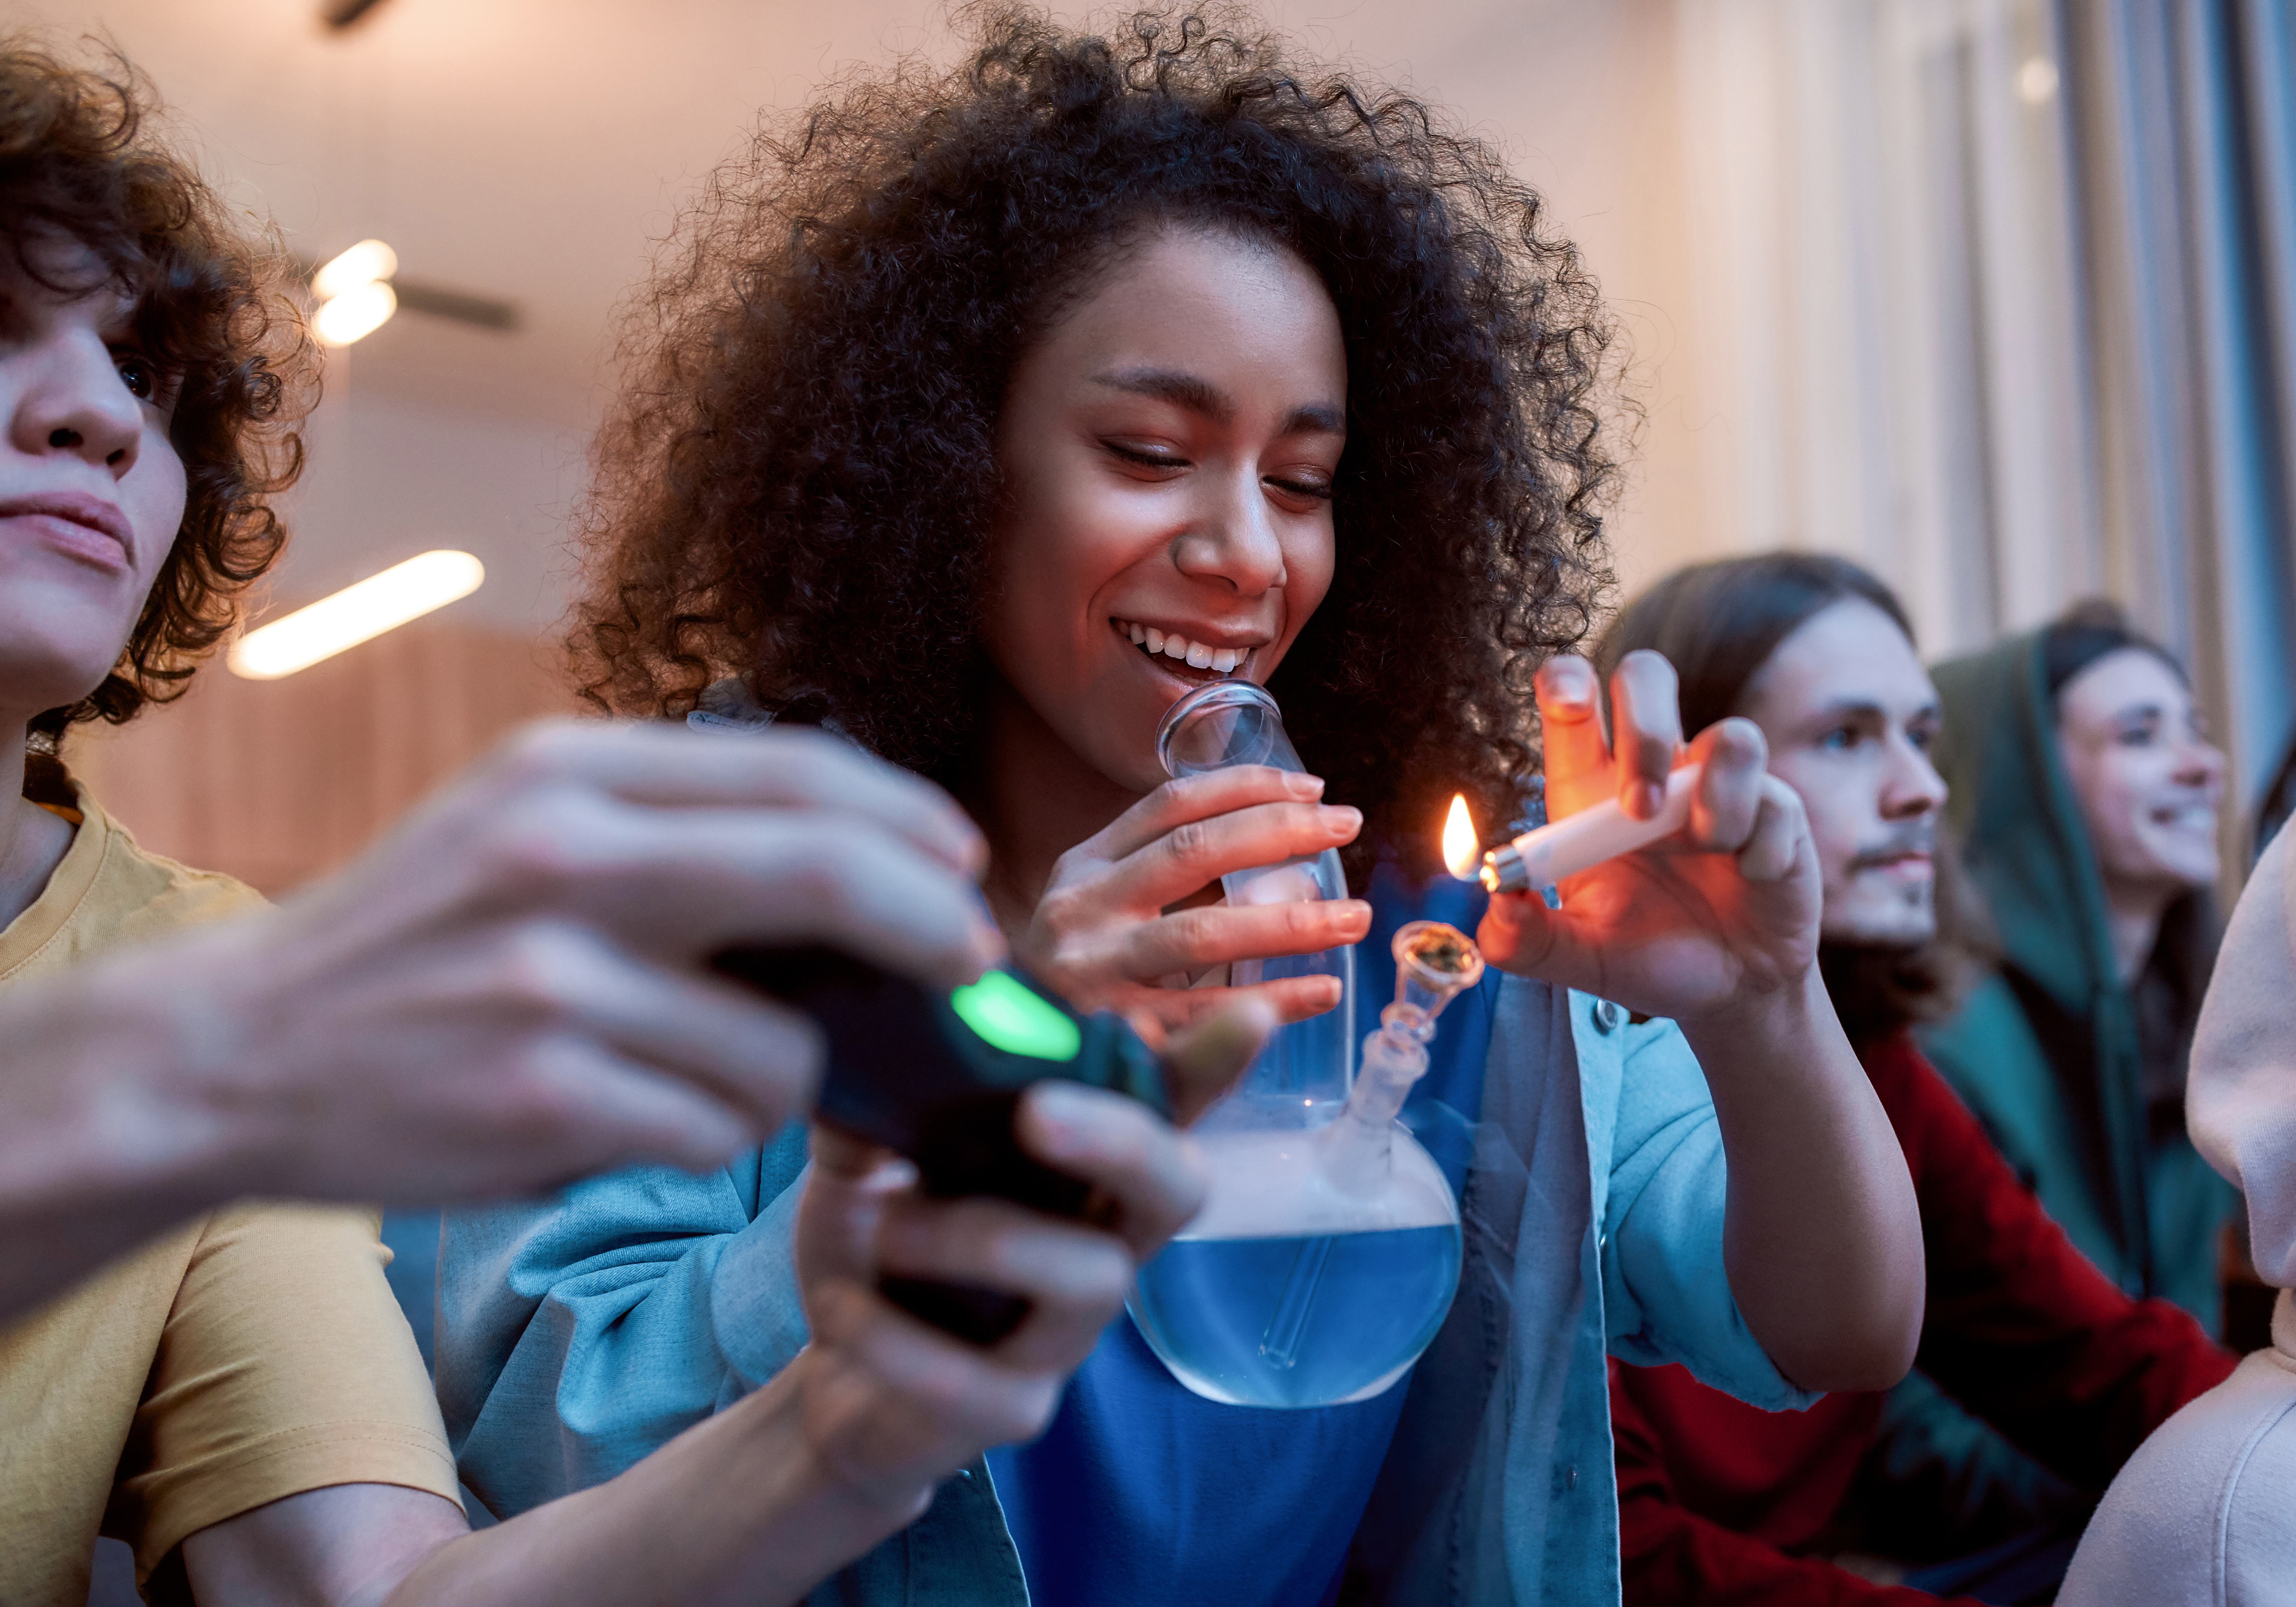 A young woman lights a bong while friends next to her play video games.